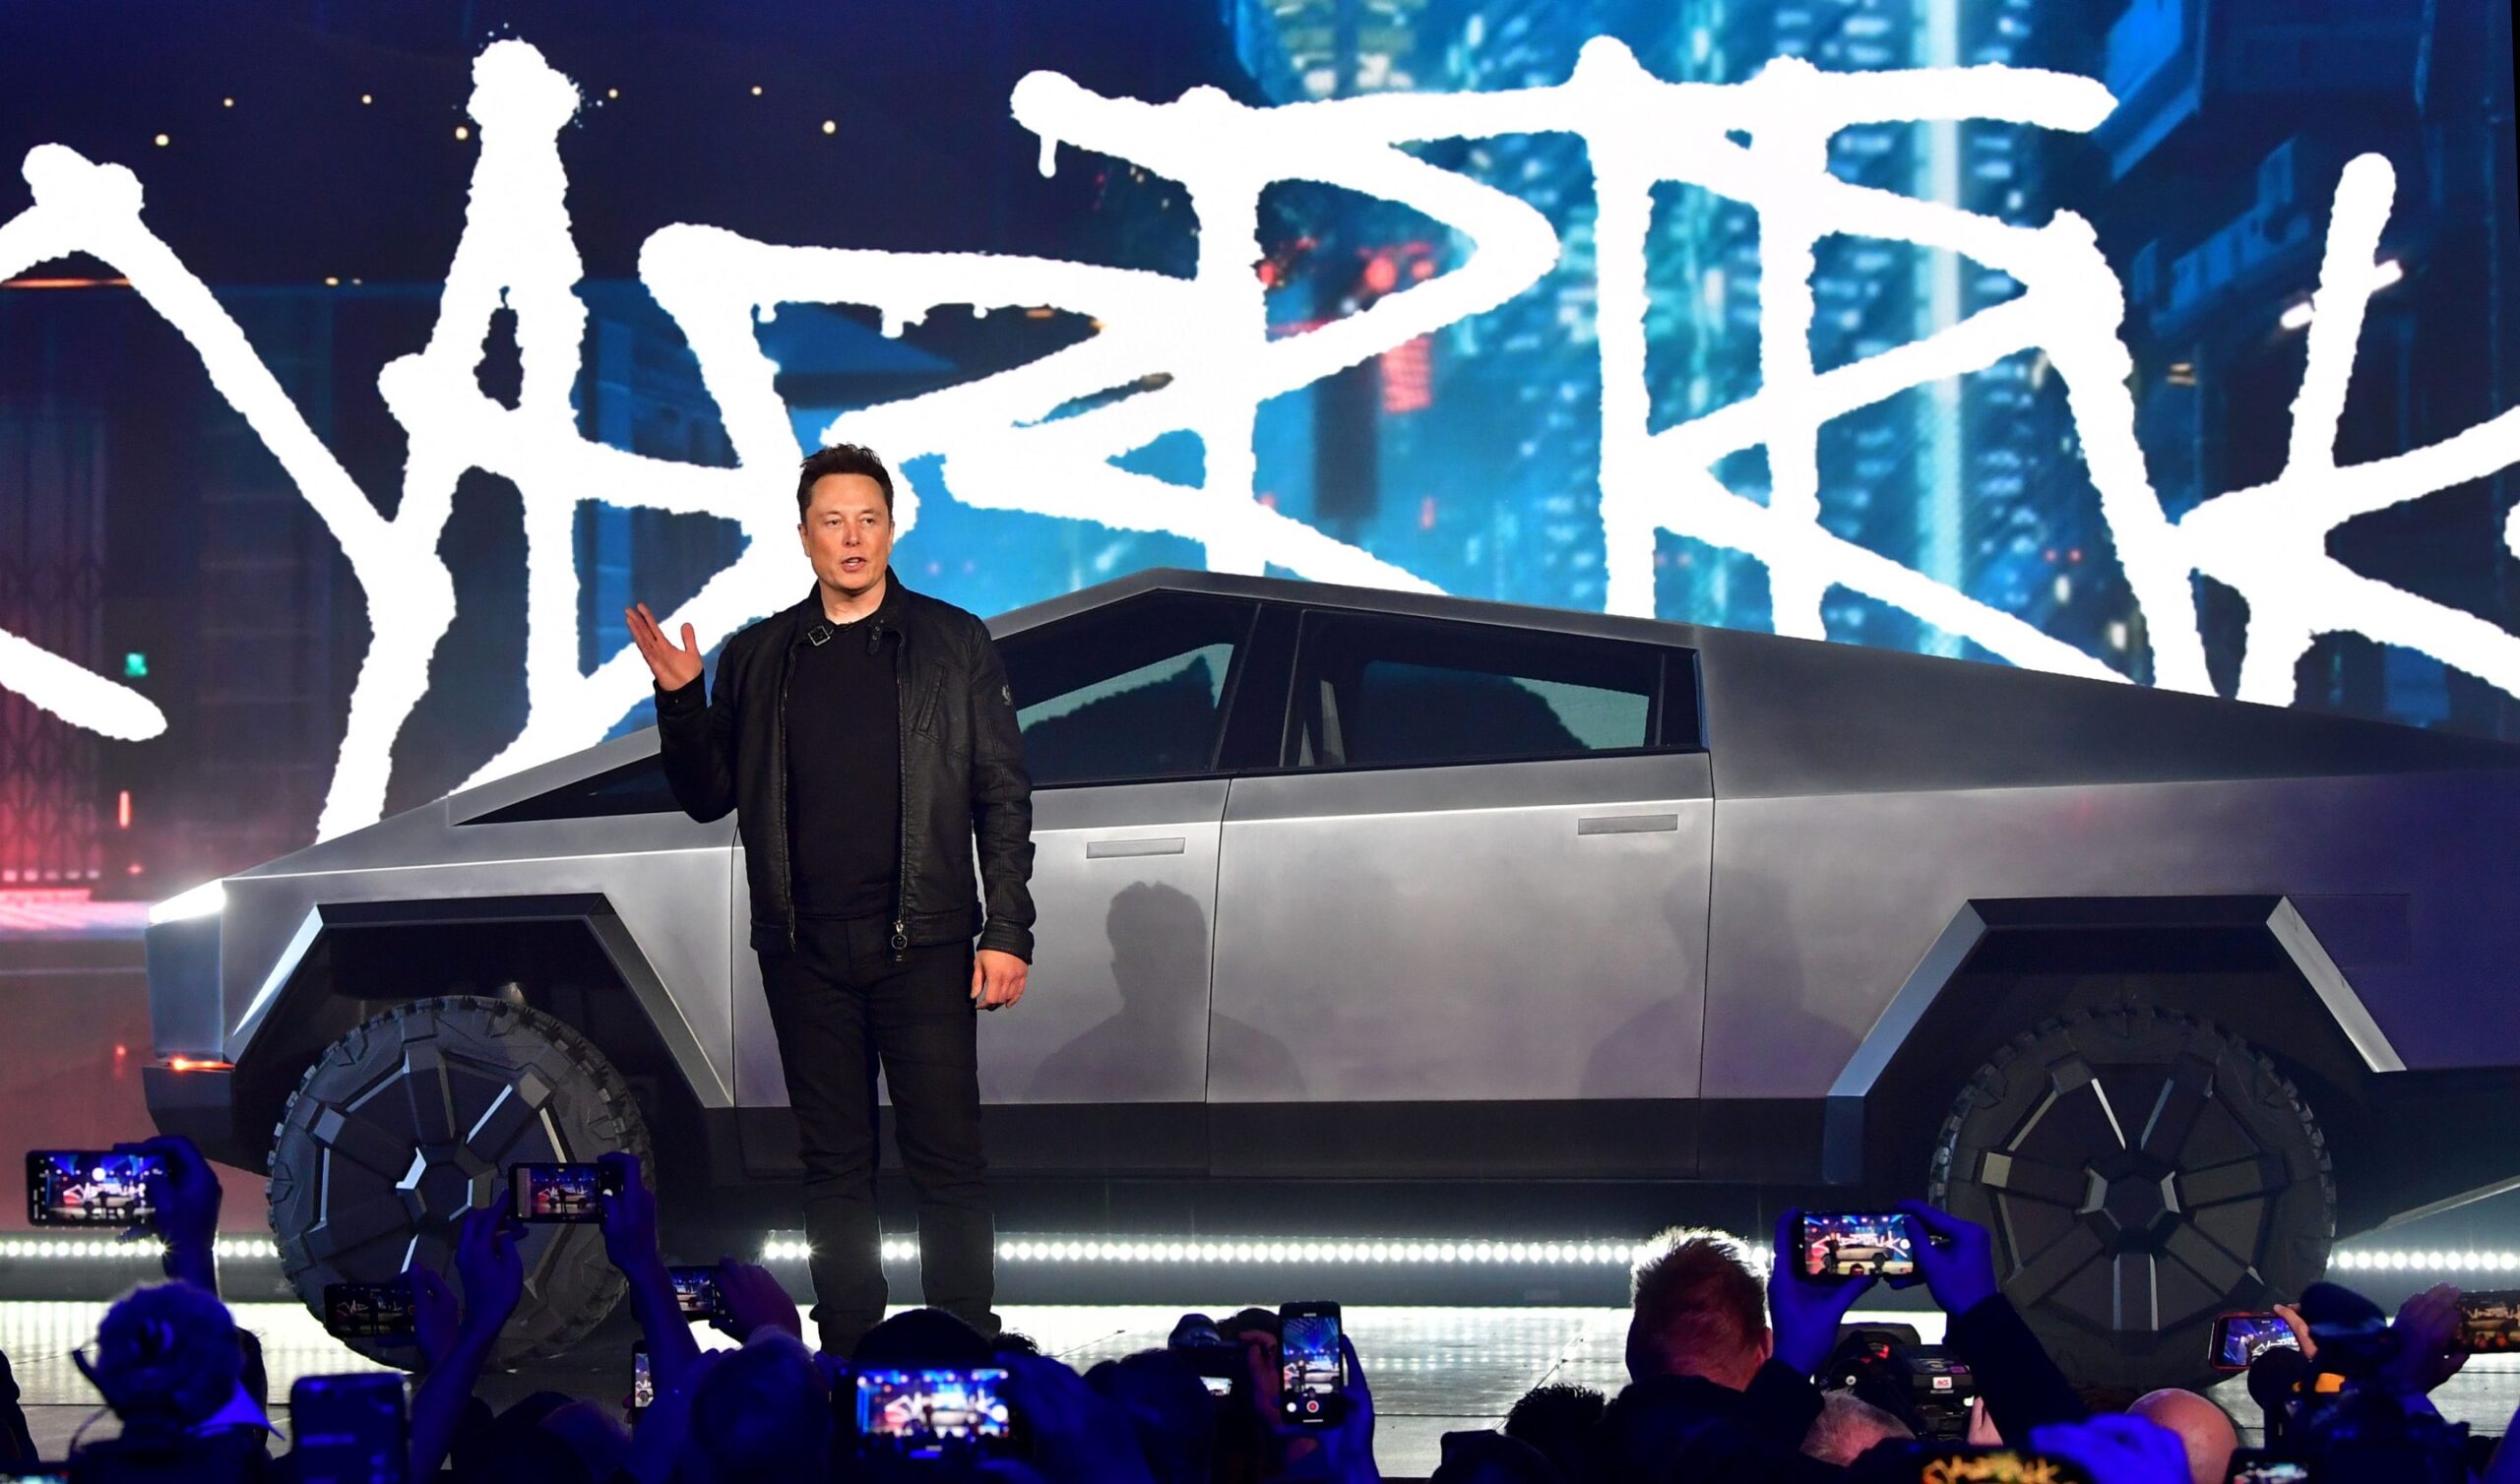 Tesla's Latest Buzz: How a Sledgehammer Became a Must-Have for Fans and Collectors Alike